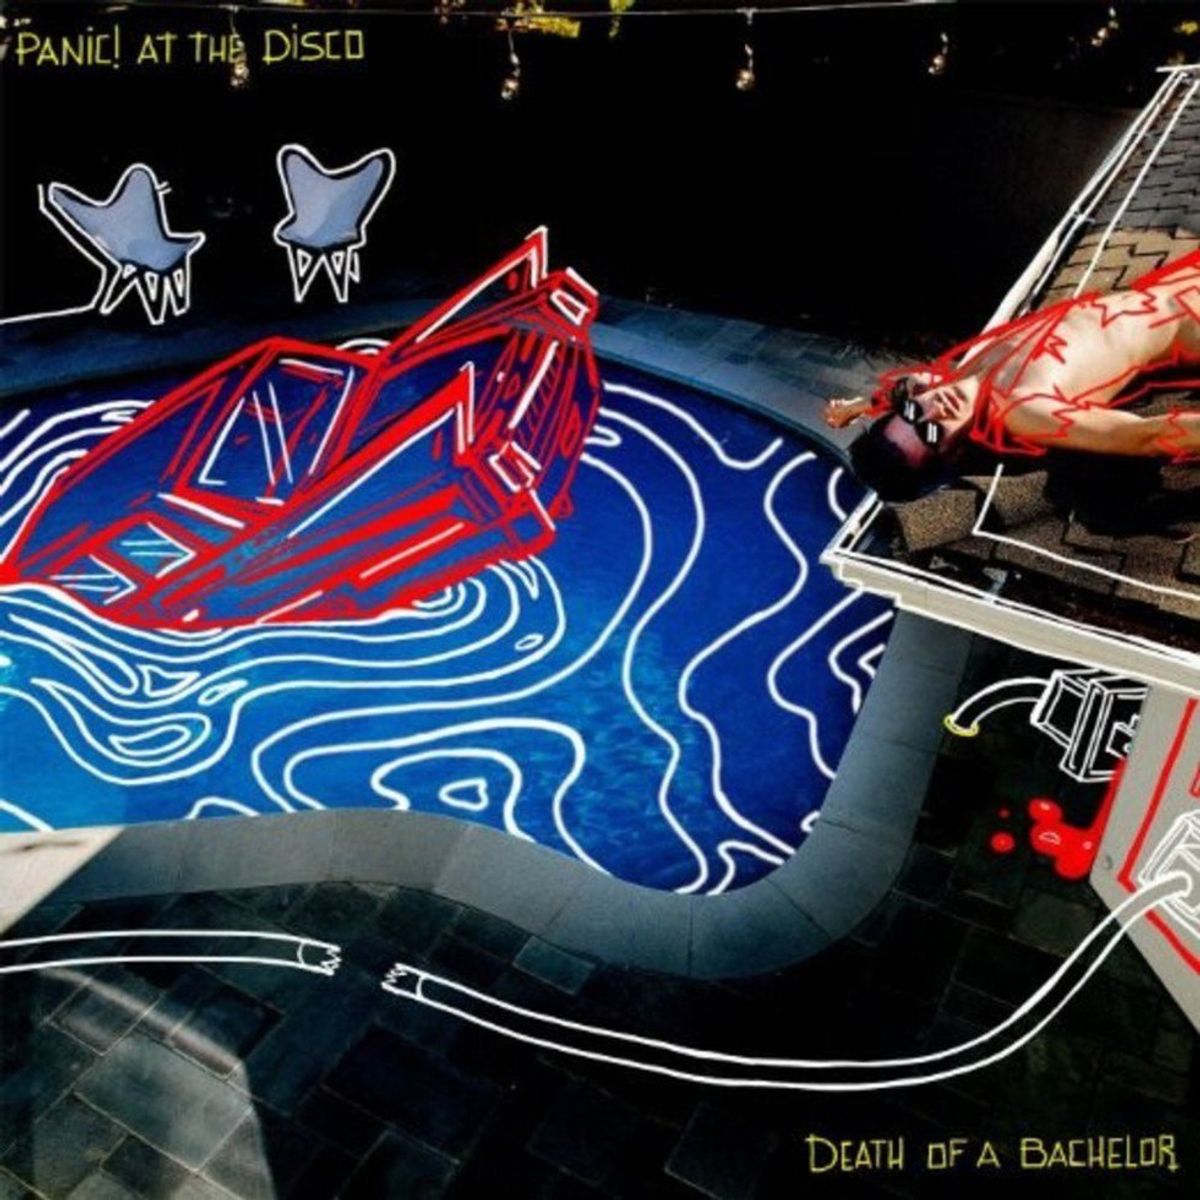 3 Reasons "Death of a Bachelor" is Panic! at the Disco's Best Album